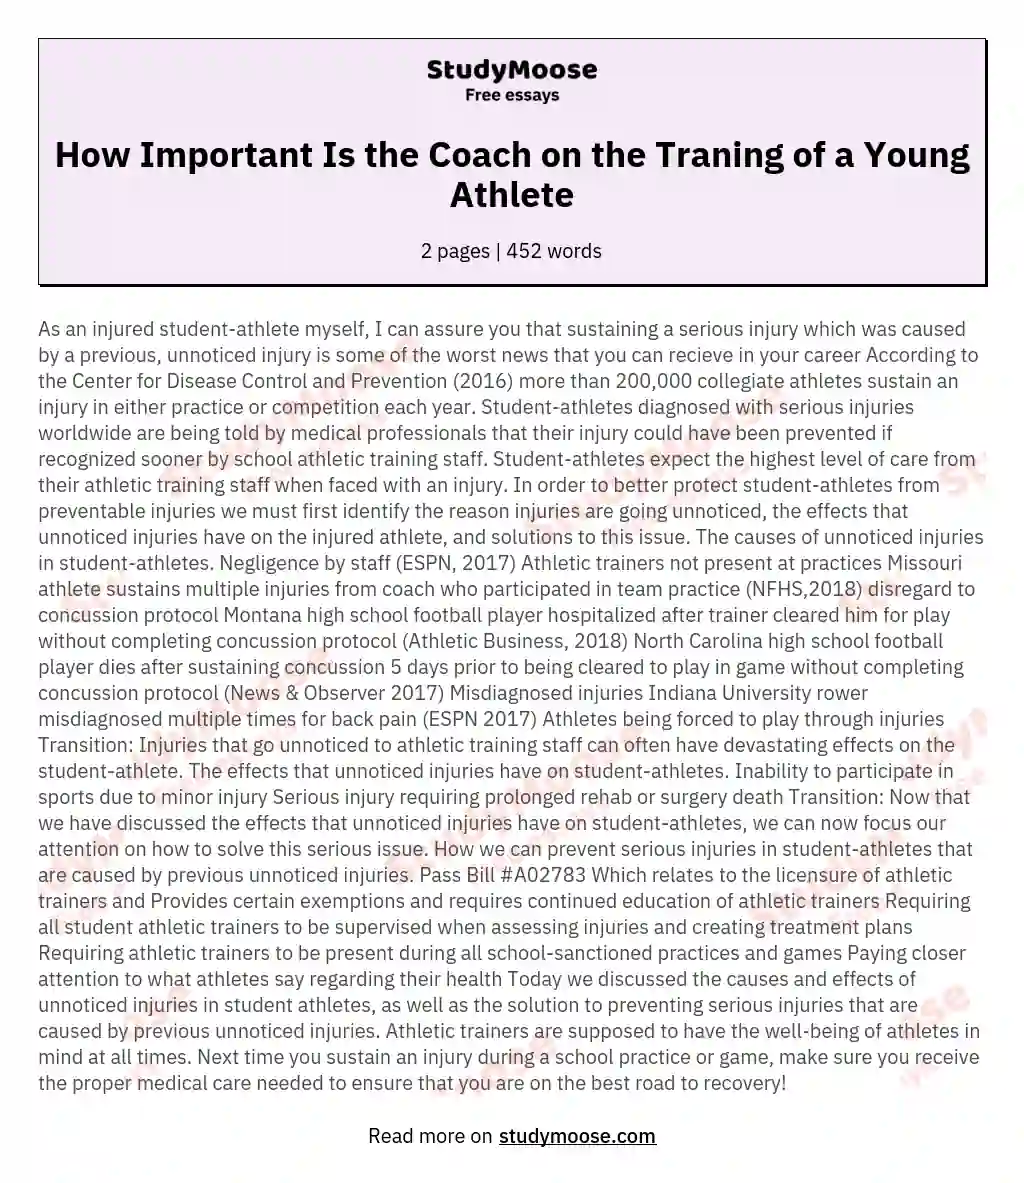 How Important Is the Coach on the Traning of a Young Athlete essay